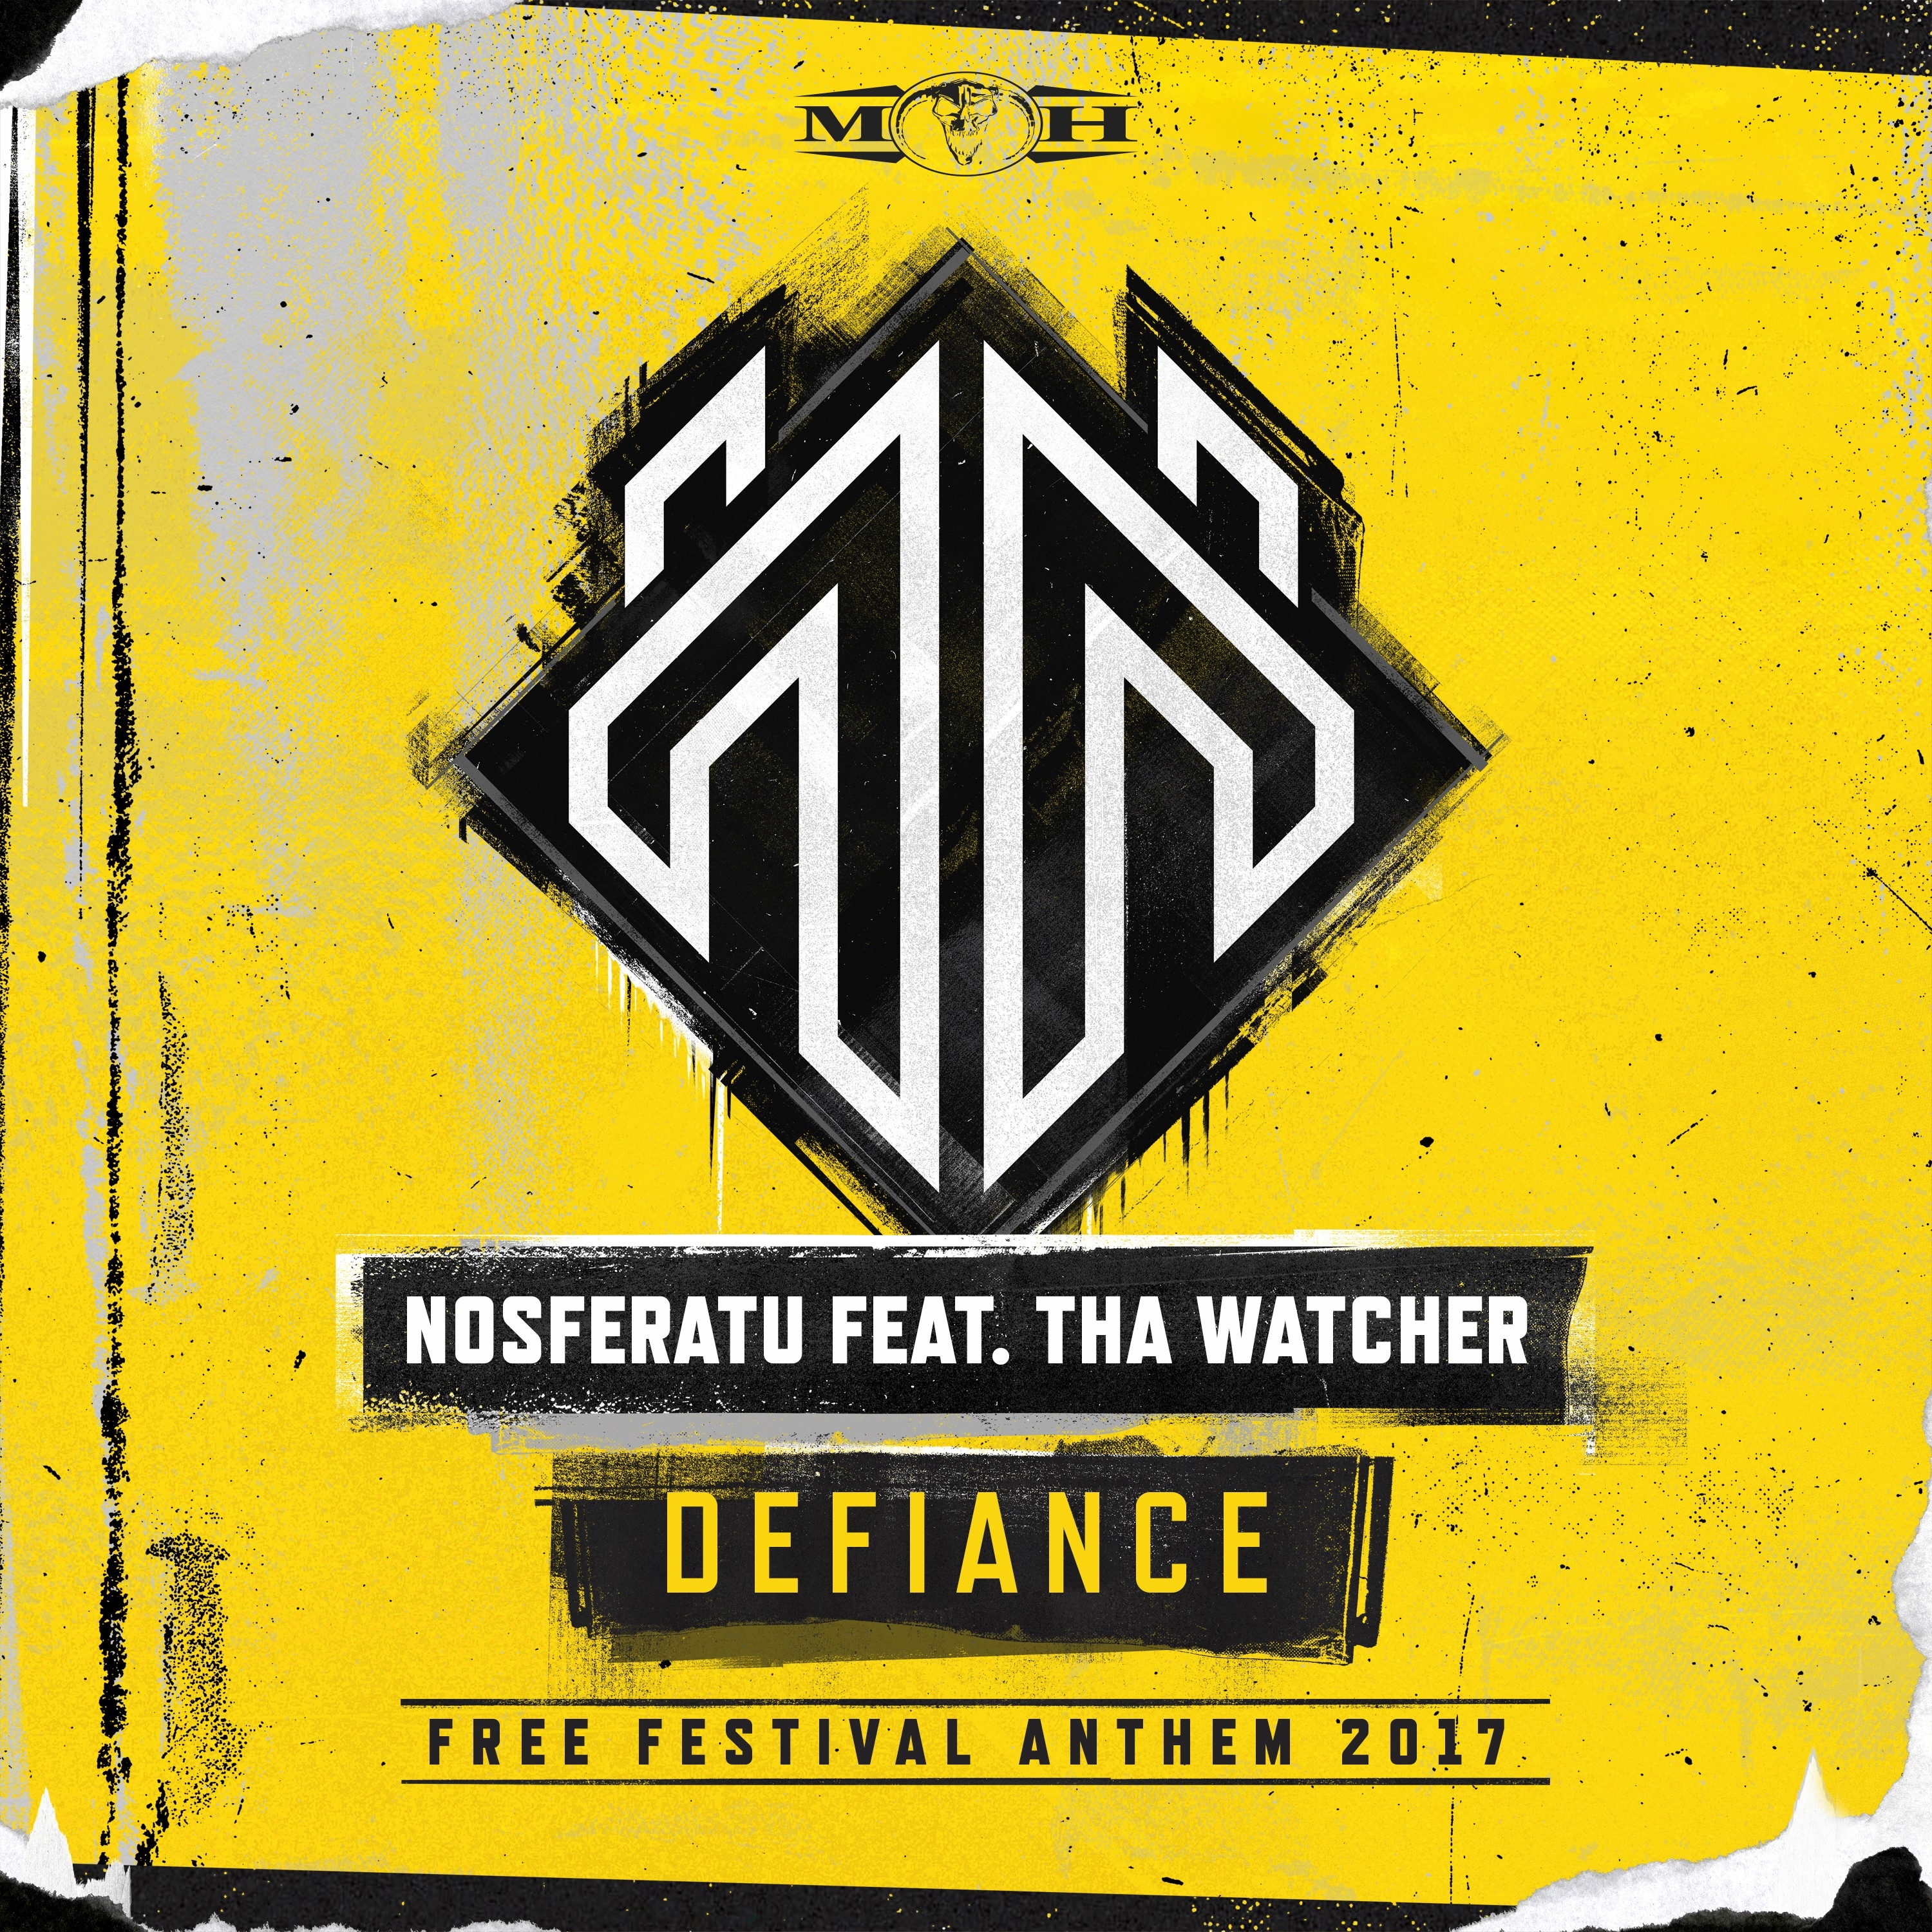 Nosferatu feat. Tha Watcher - Defiance (Official Free Festival 2017 Anthem)  - MP3 and WAV downloads at Hardtunes